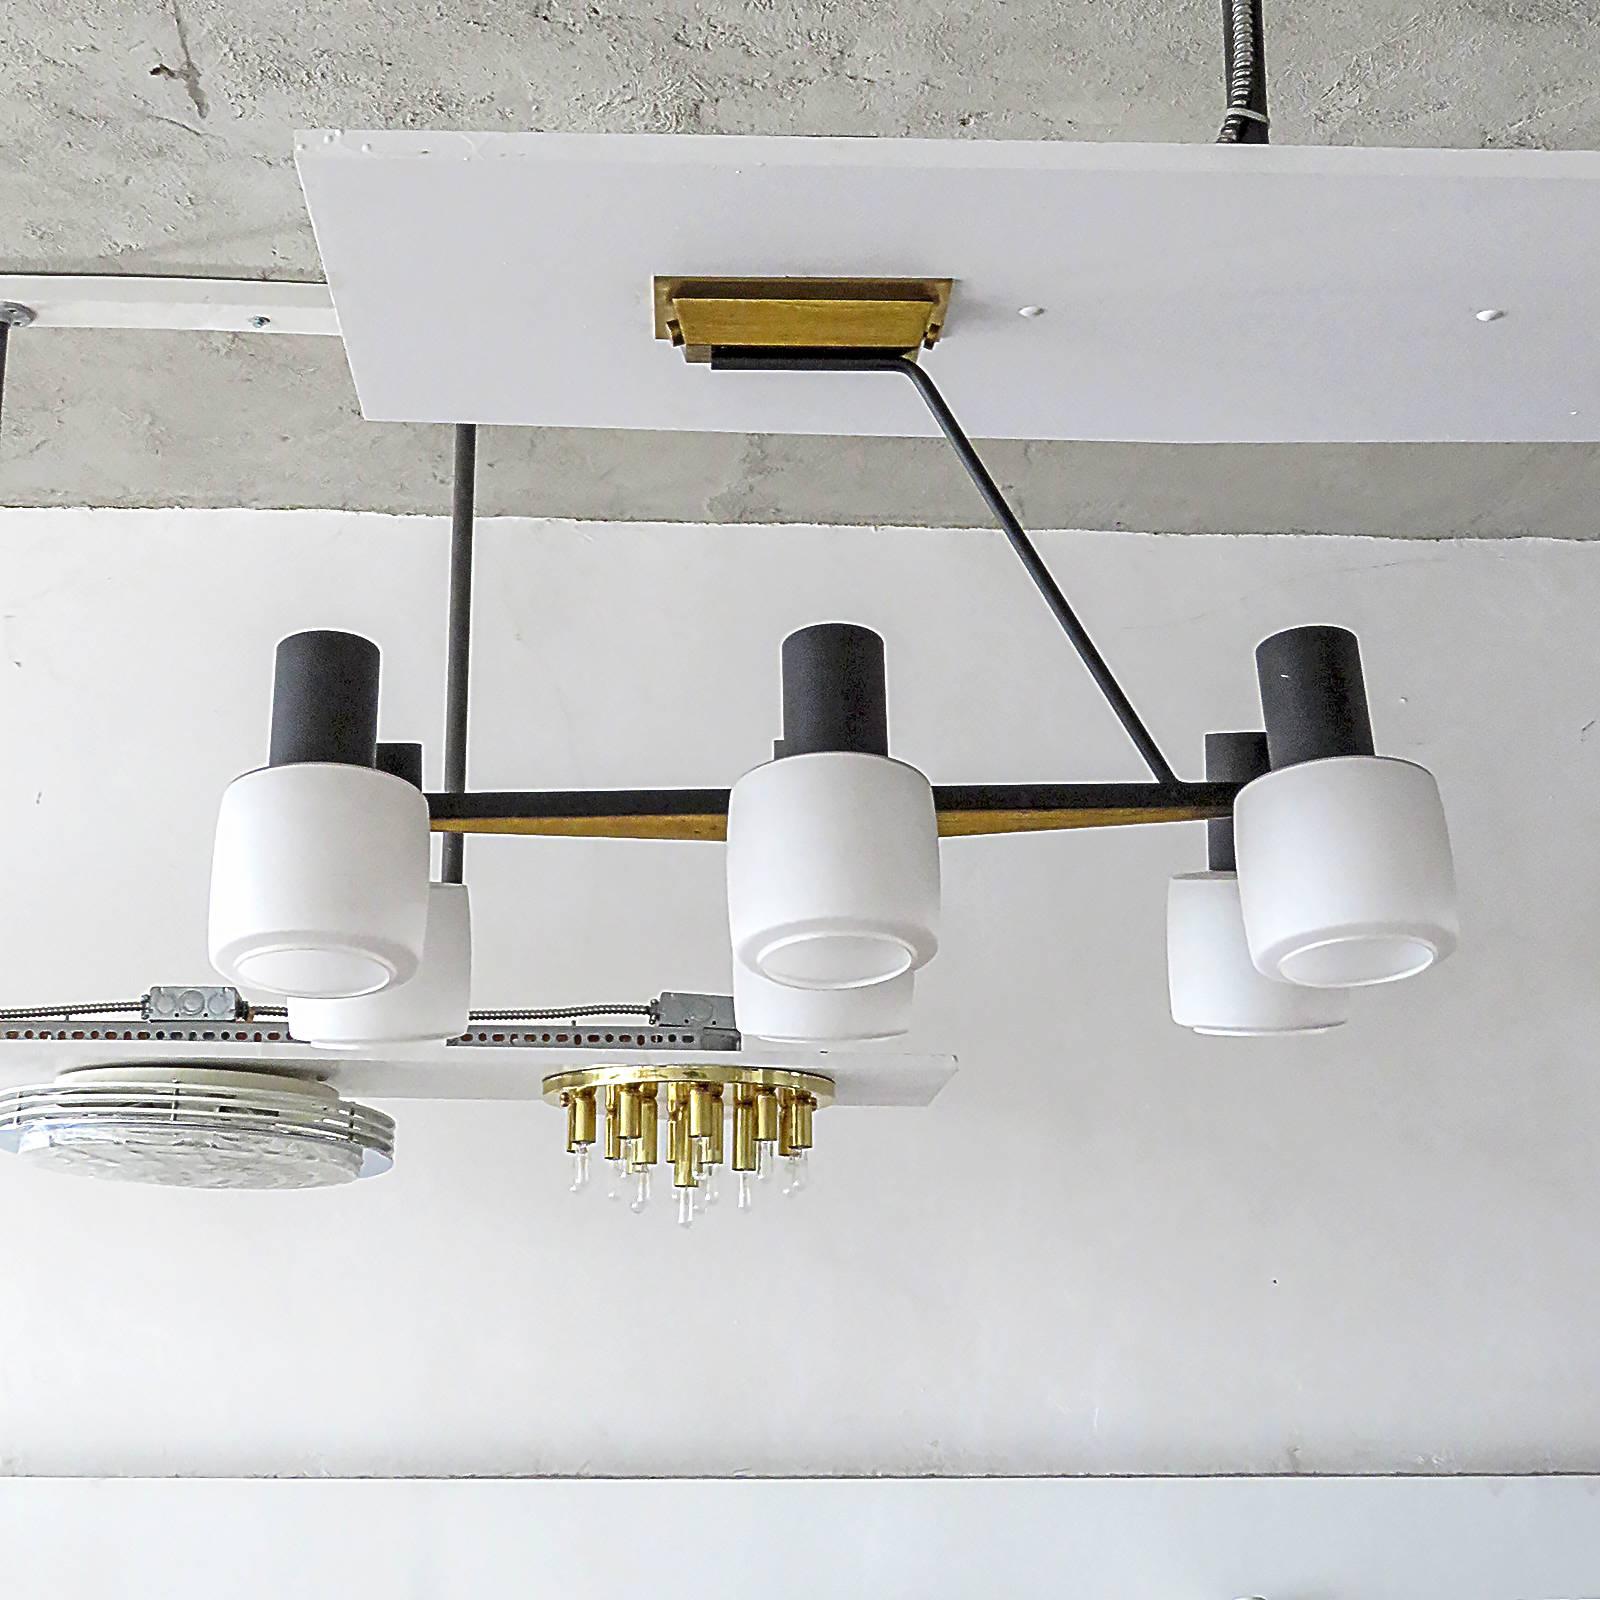 stunning french six light chandelier by Arlus, with six matte white cased glass shade holders branching off a cantilevering brass/black enameled metal main arm 